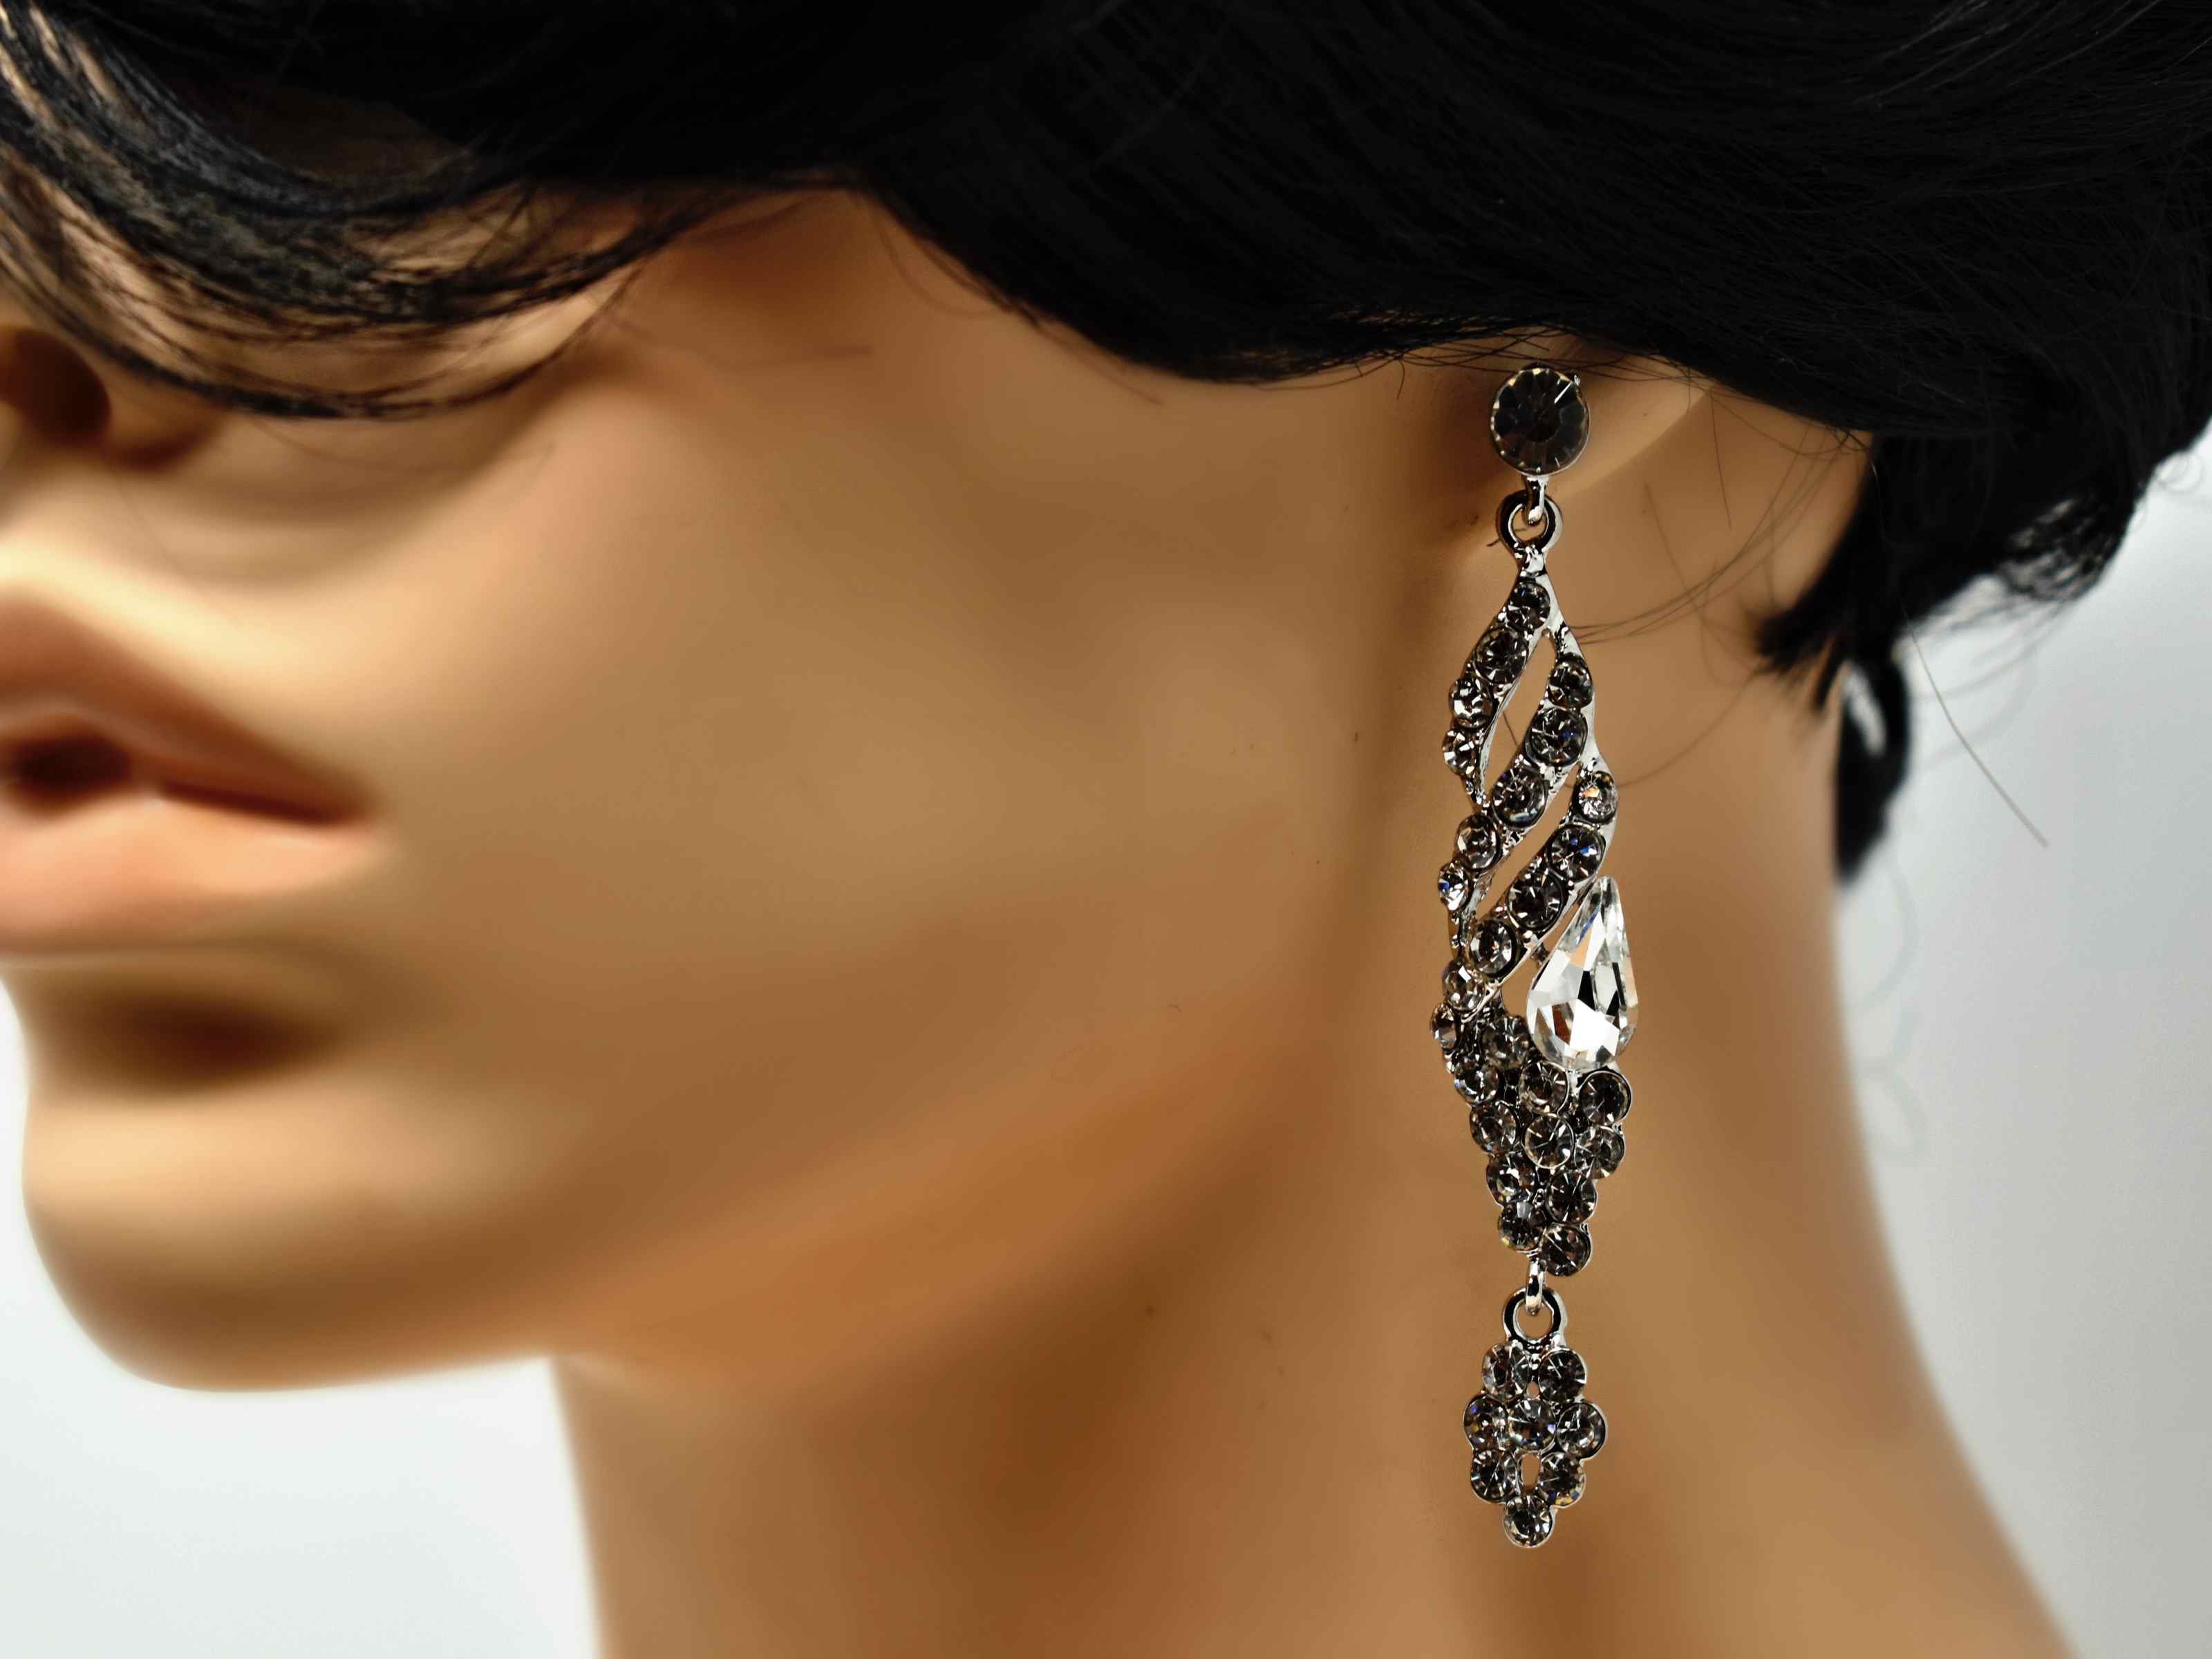 These formal silver earrings are a classic addition to your outfits. They are 3 inches in length and encrusted with clear stones. 